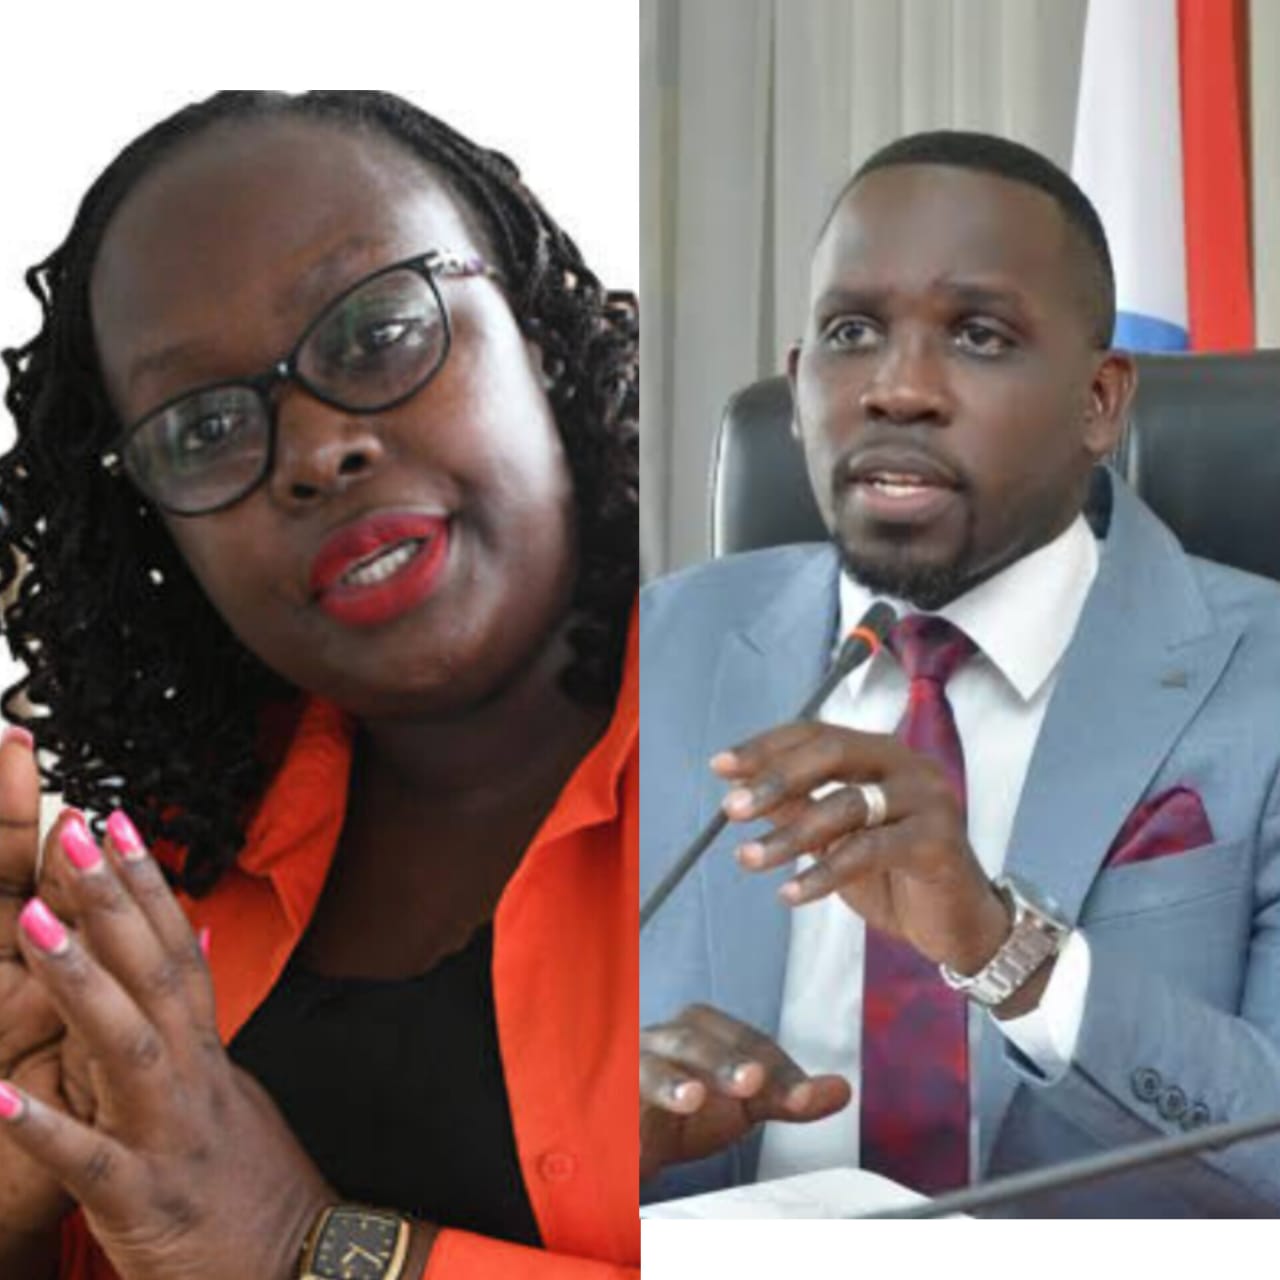 MP Joyce Bagala criticises LOP over committee reassignment, expresses party loyalty